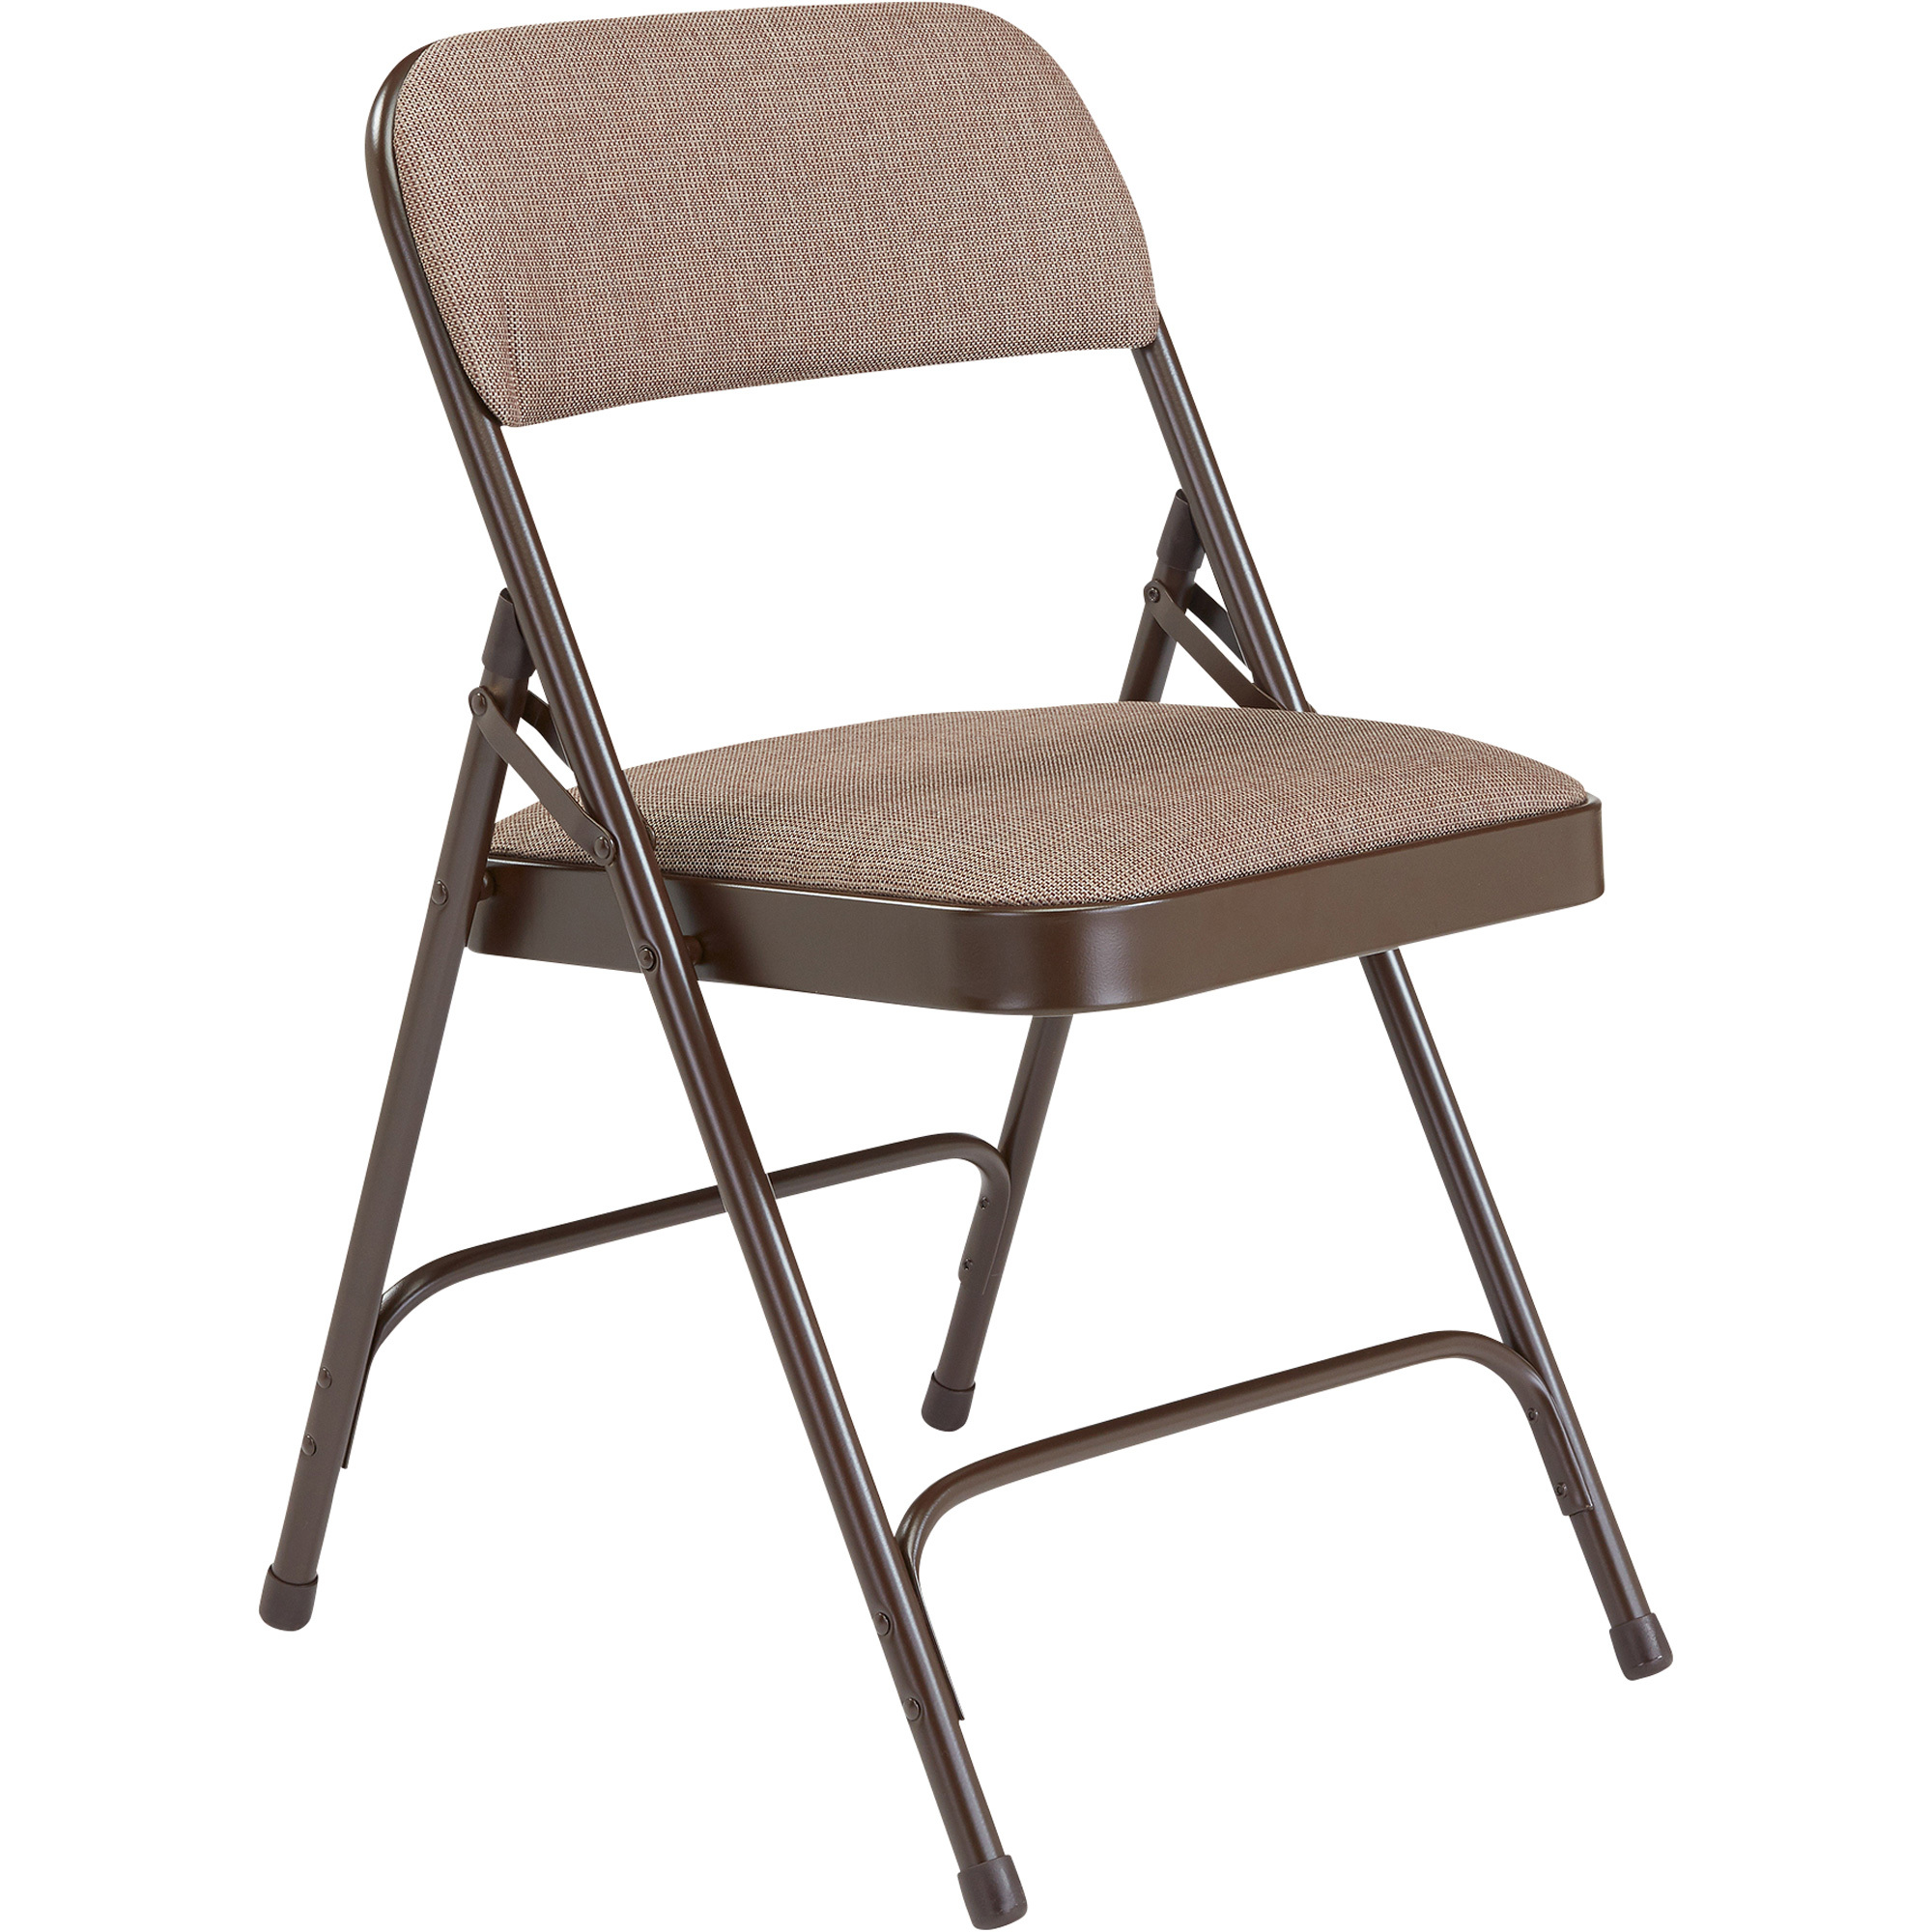 Steel Folding Chairs with Fabric Padded Seat and Back — Set of 4, Walnut/Brown, Model - National Public Seating 2207